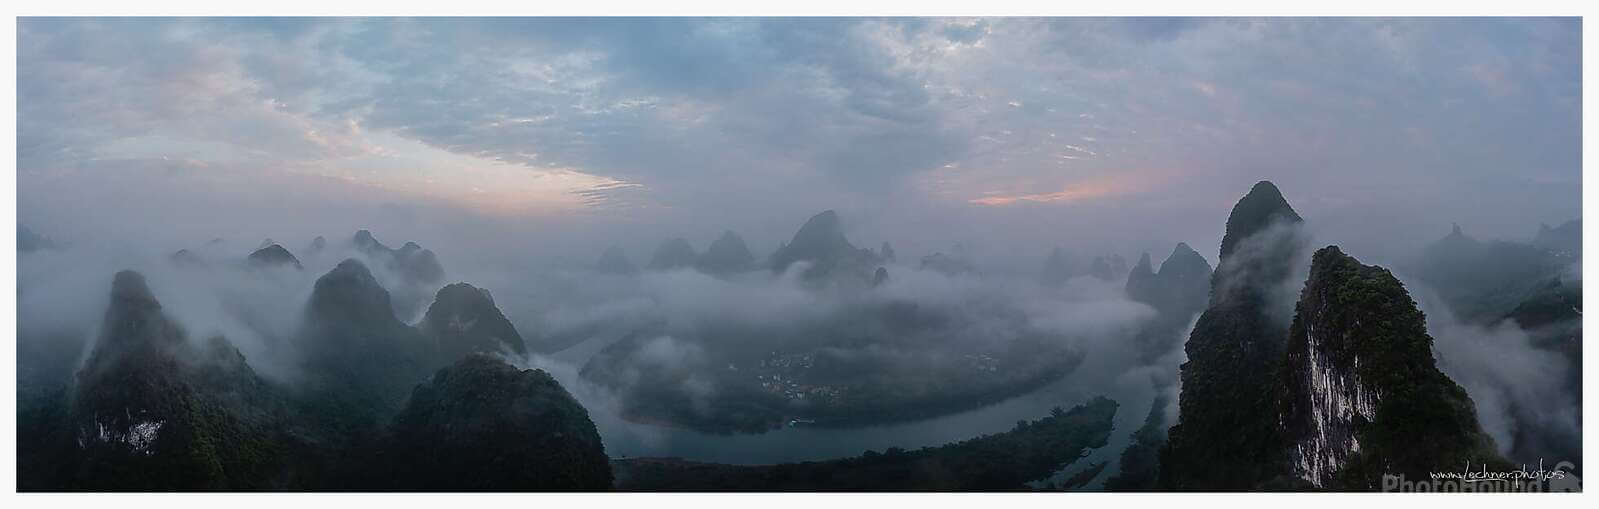 Image of Sunrise view from Xianggong Hill by Florian Lechner